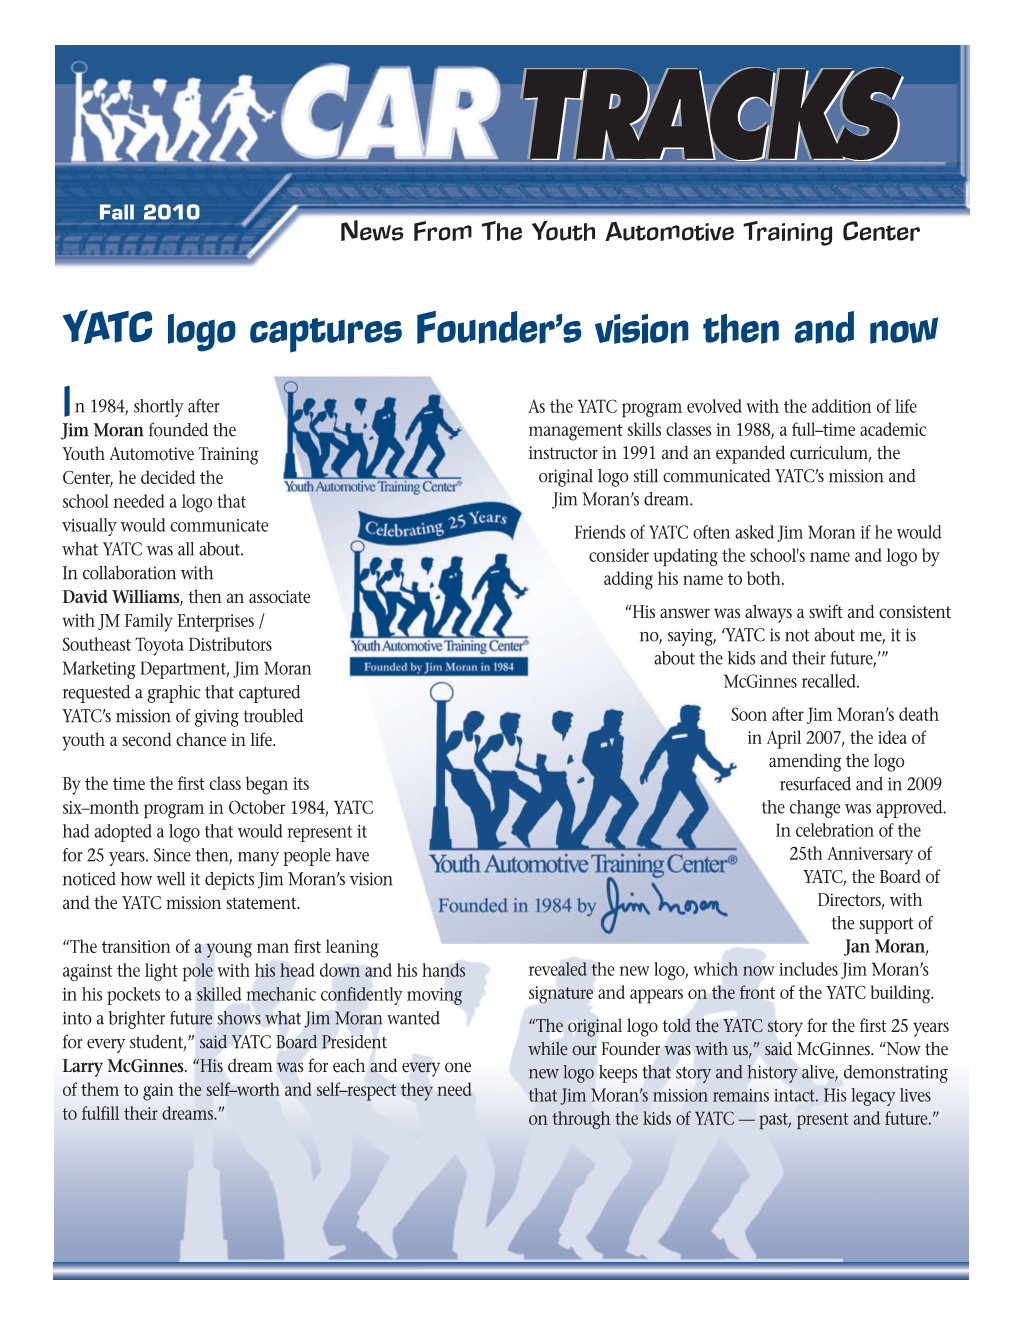 YATC Logo Captures Founder's Vision Then And